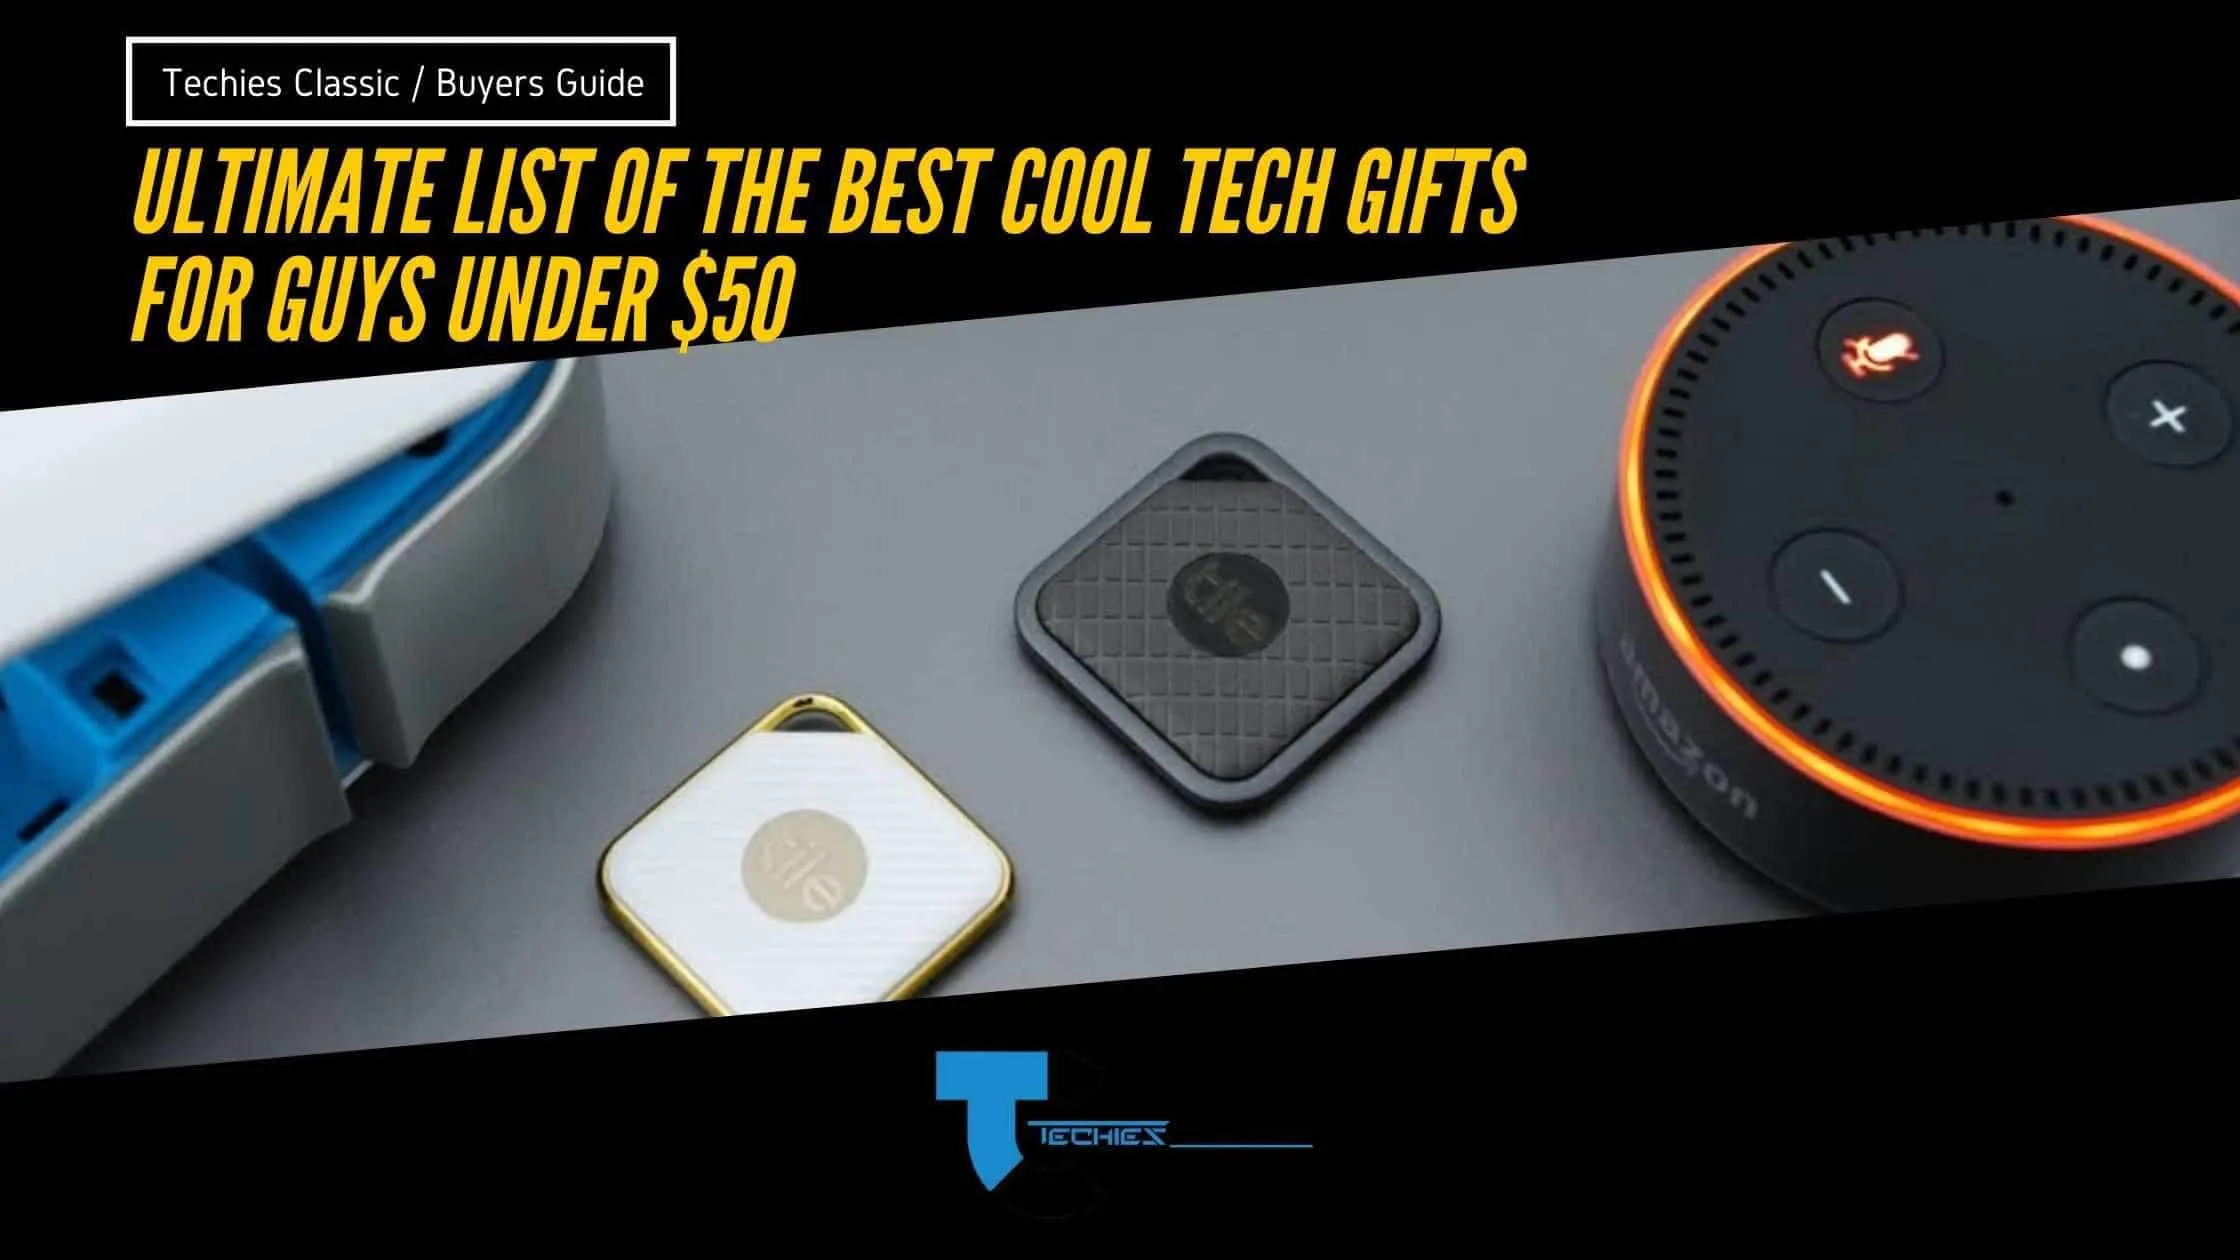 Choose the best cool tech gifts for guys under $50 in 2022